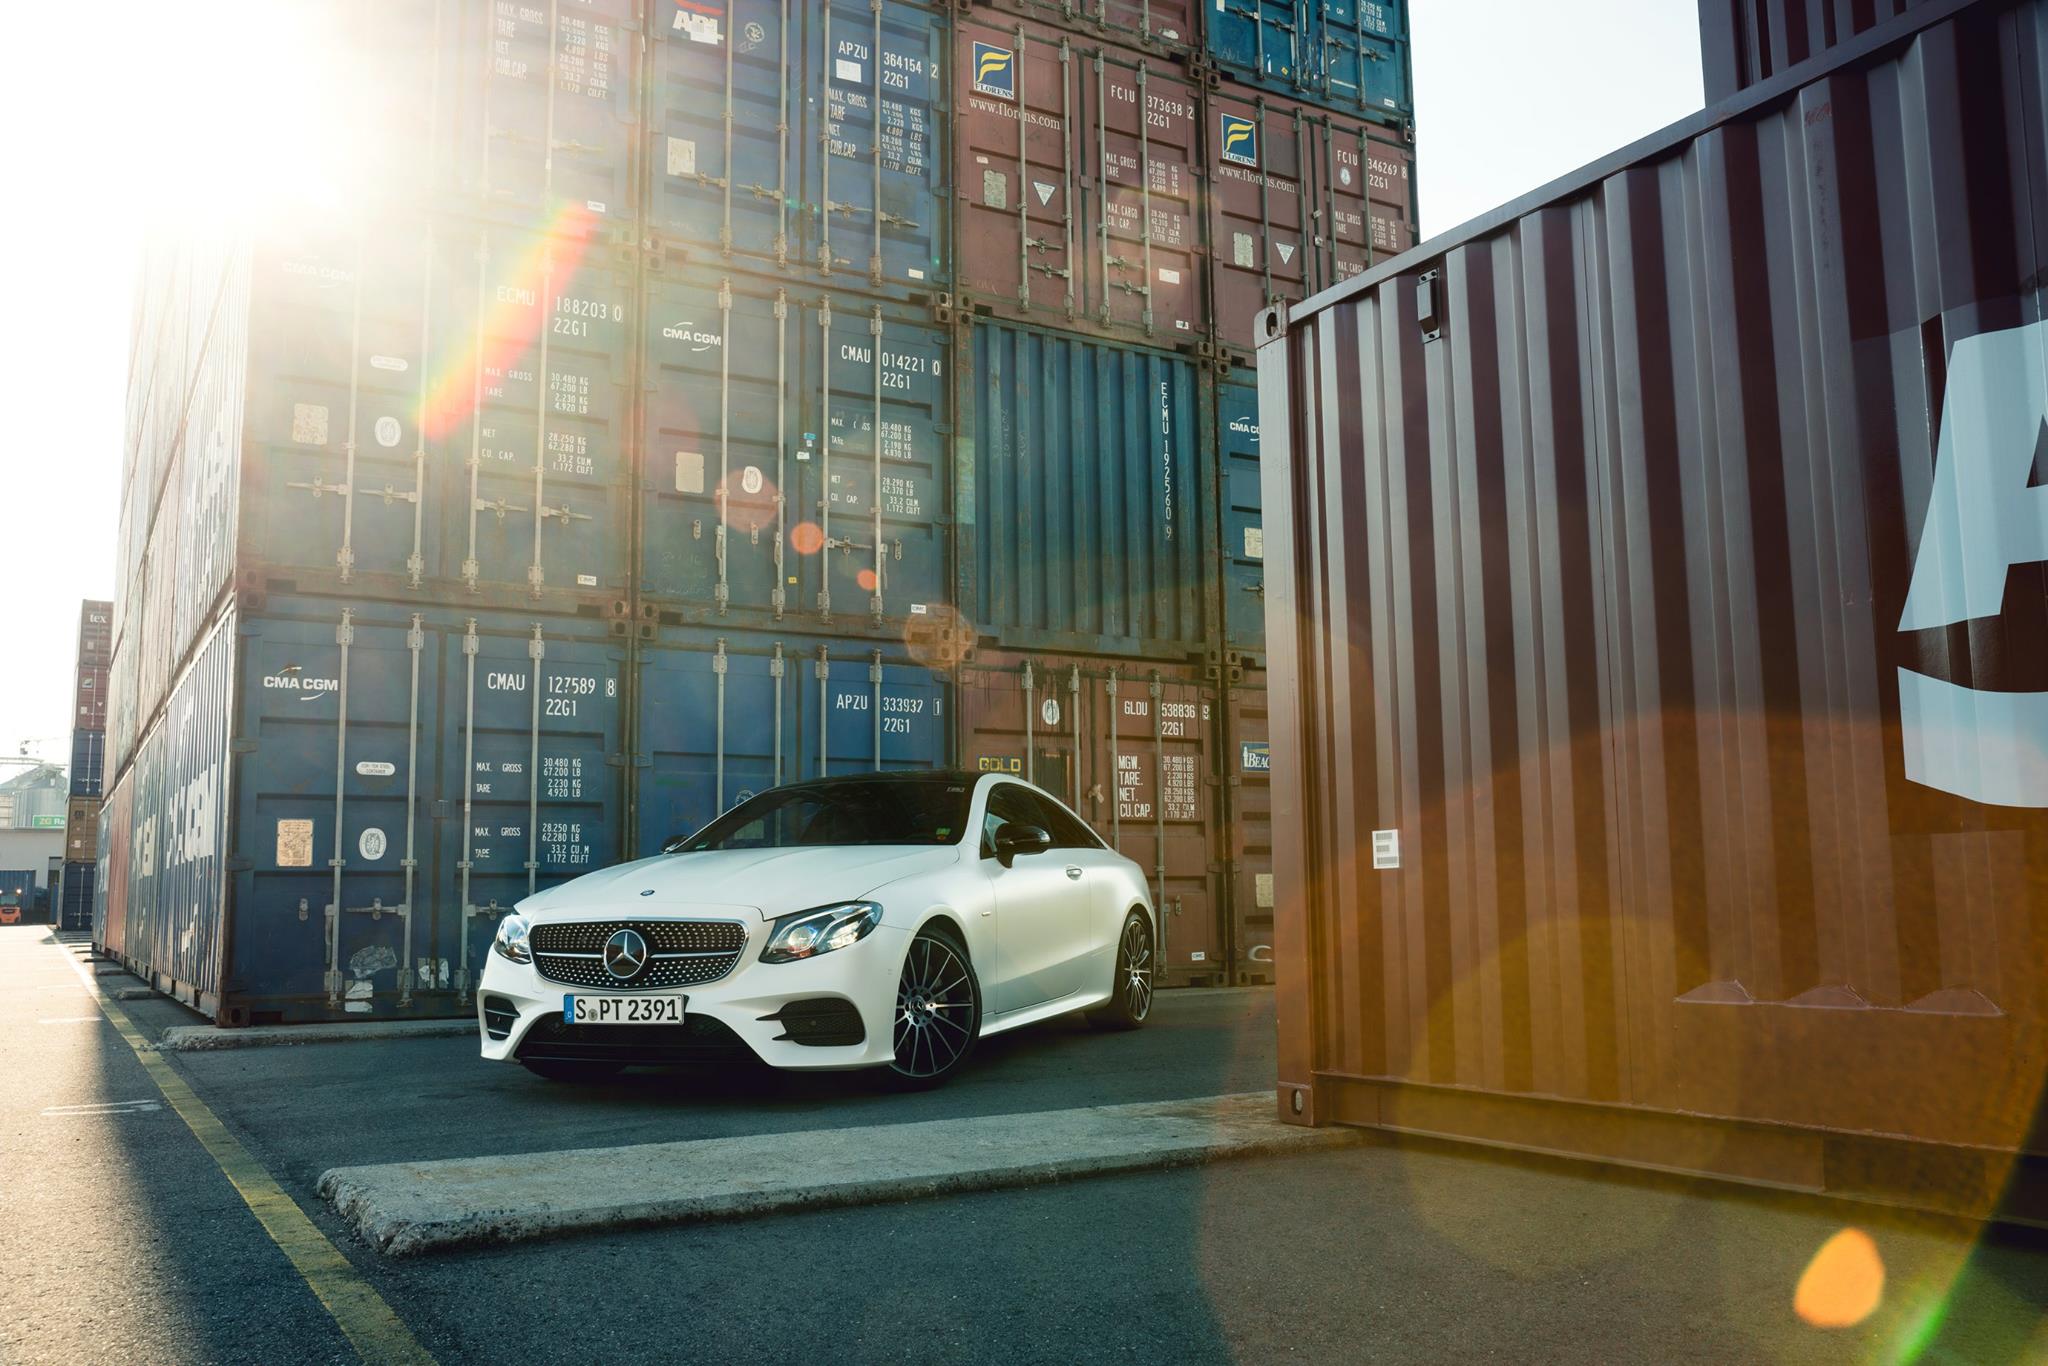 General 2048x1366 Mercedes-Benz white car containers lens flare German cars